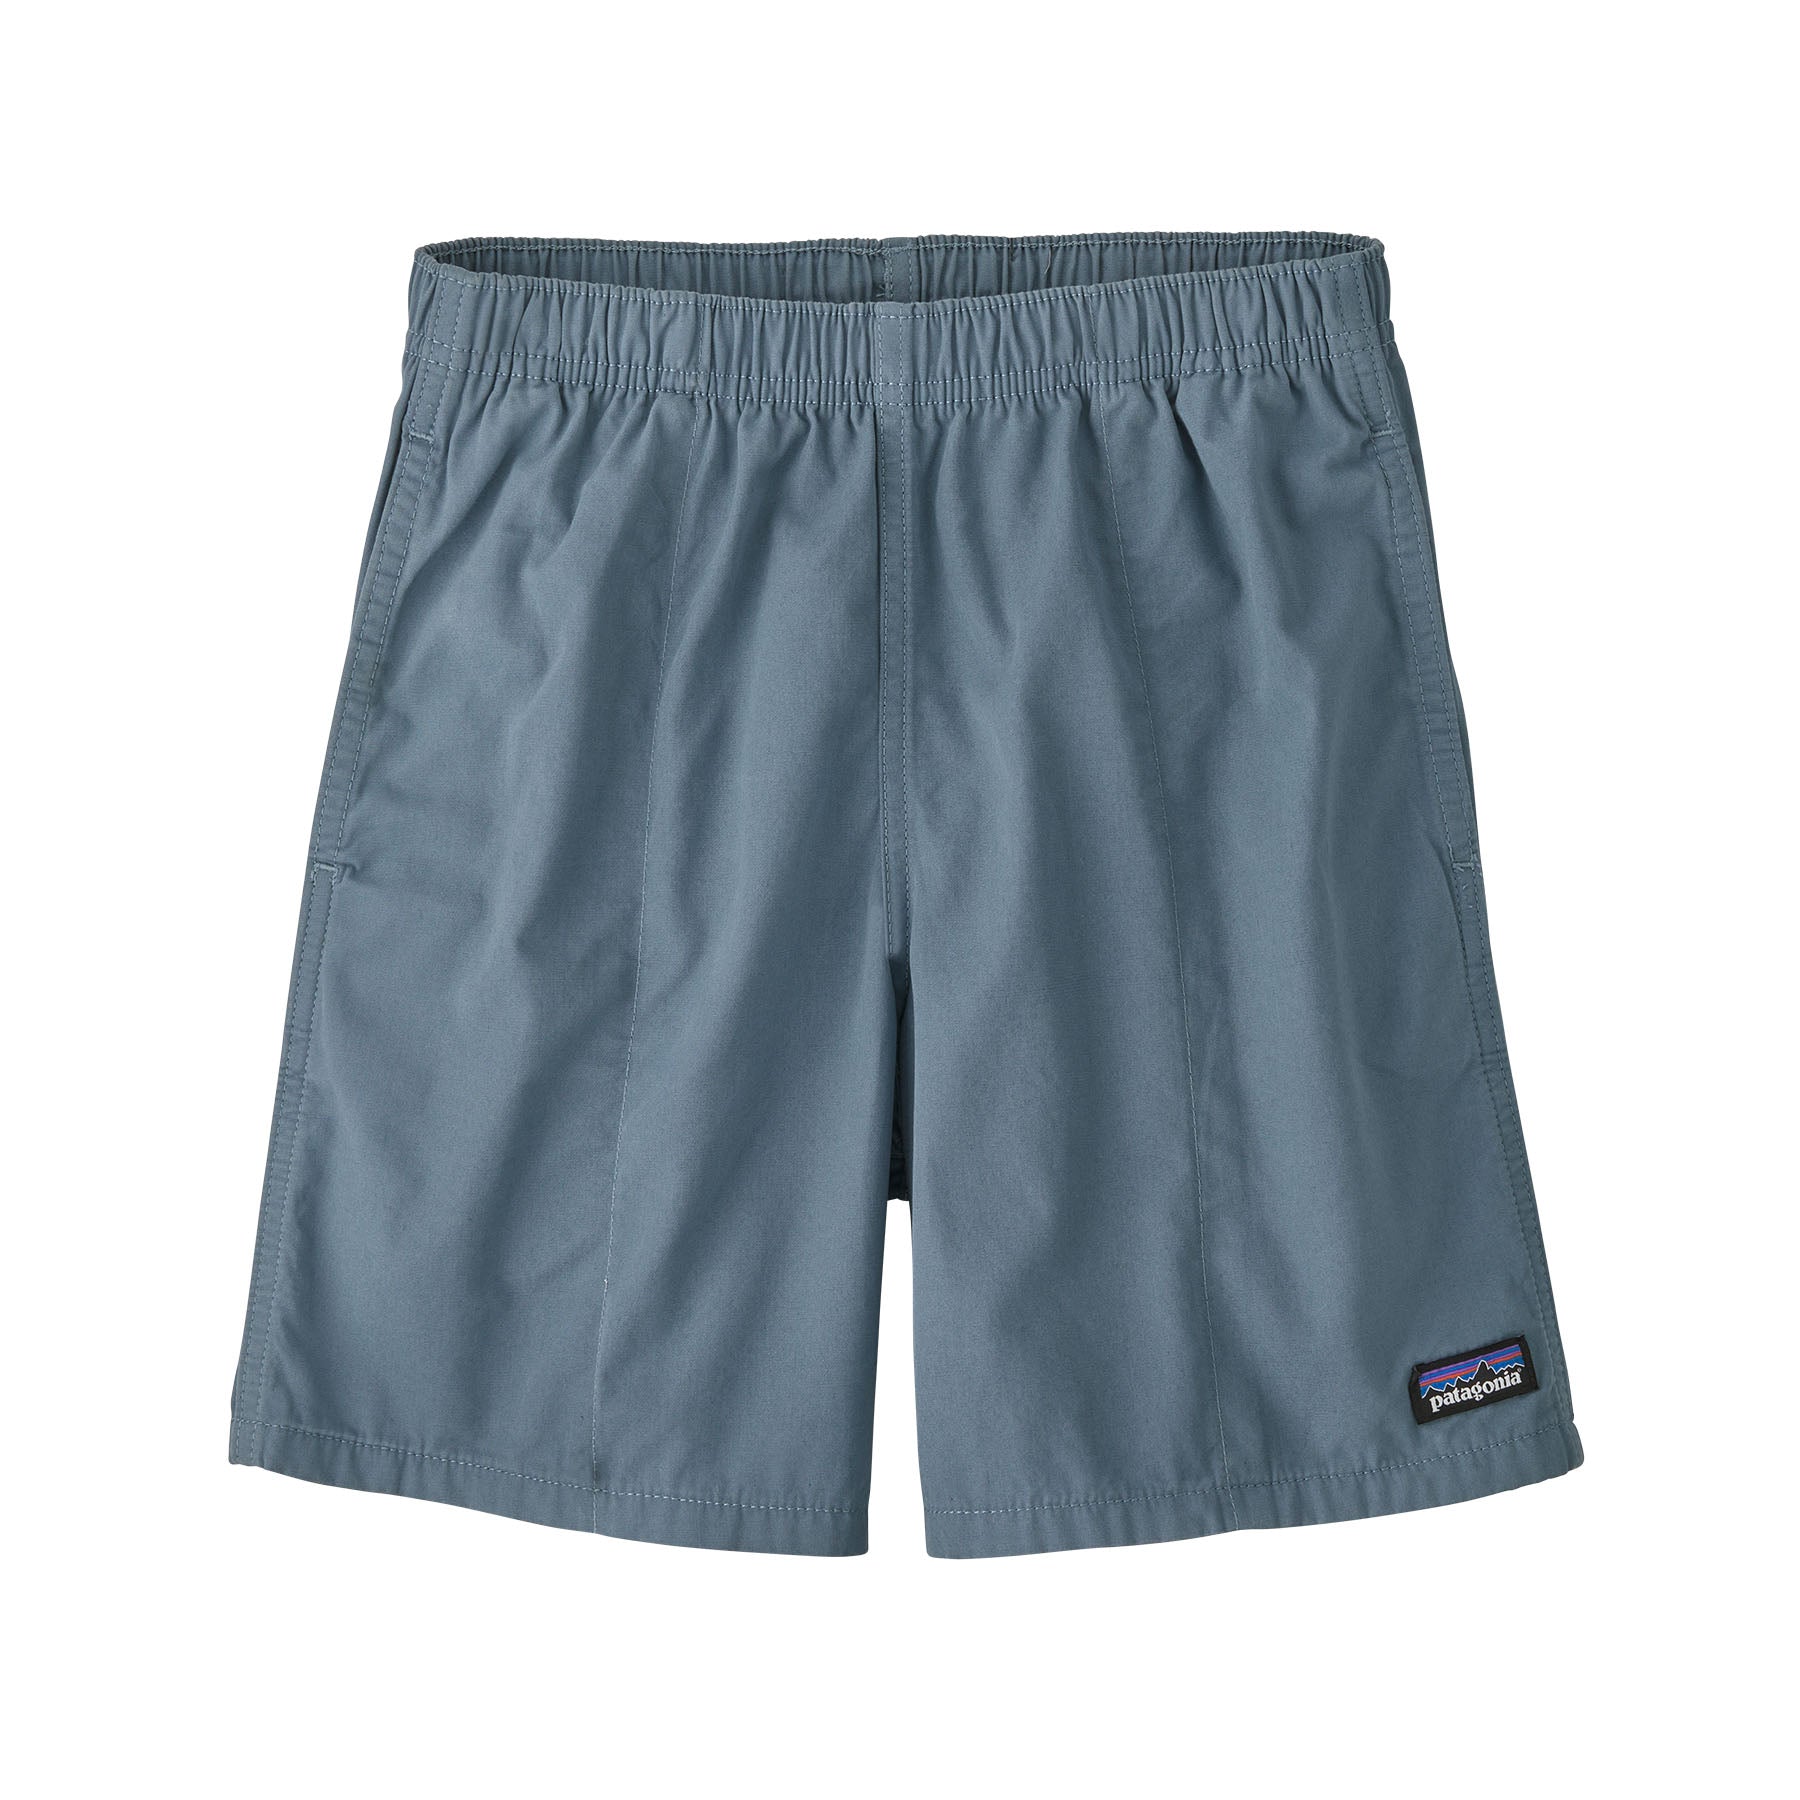 Patagonia Kids Funhoggers Short - Mountain Kids Outfitters